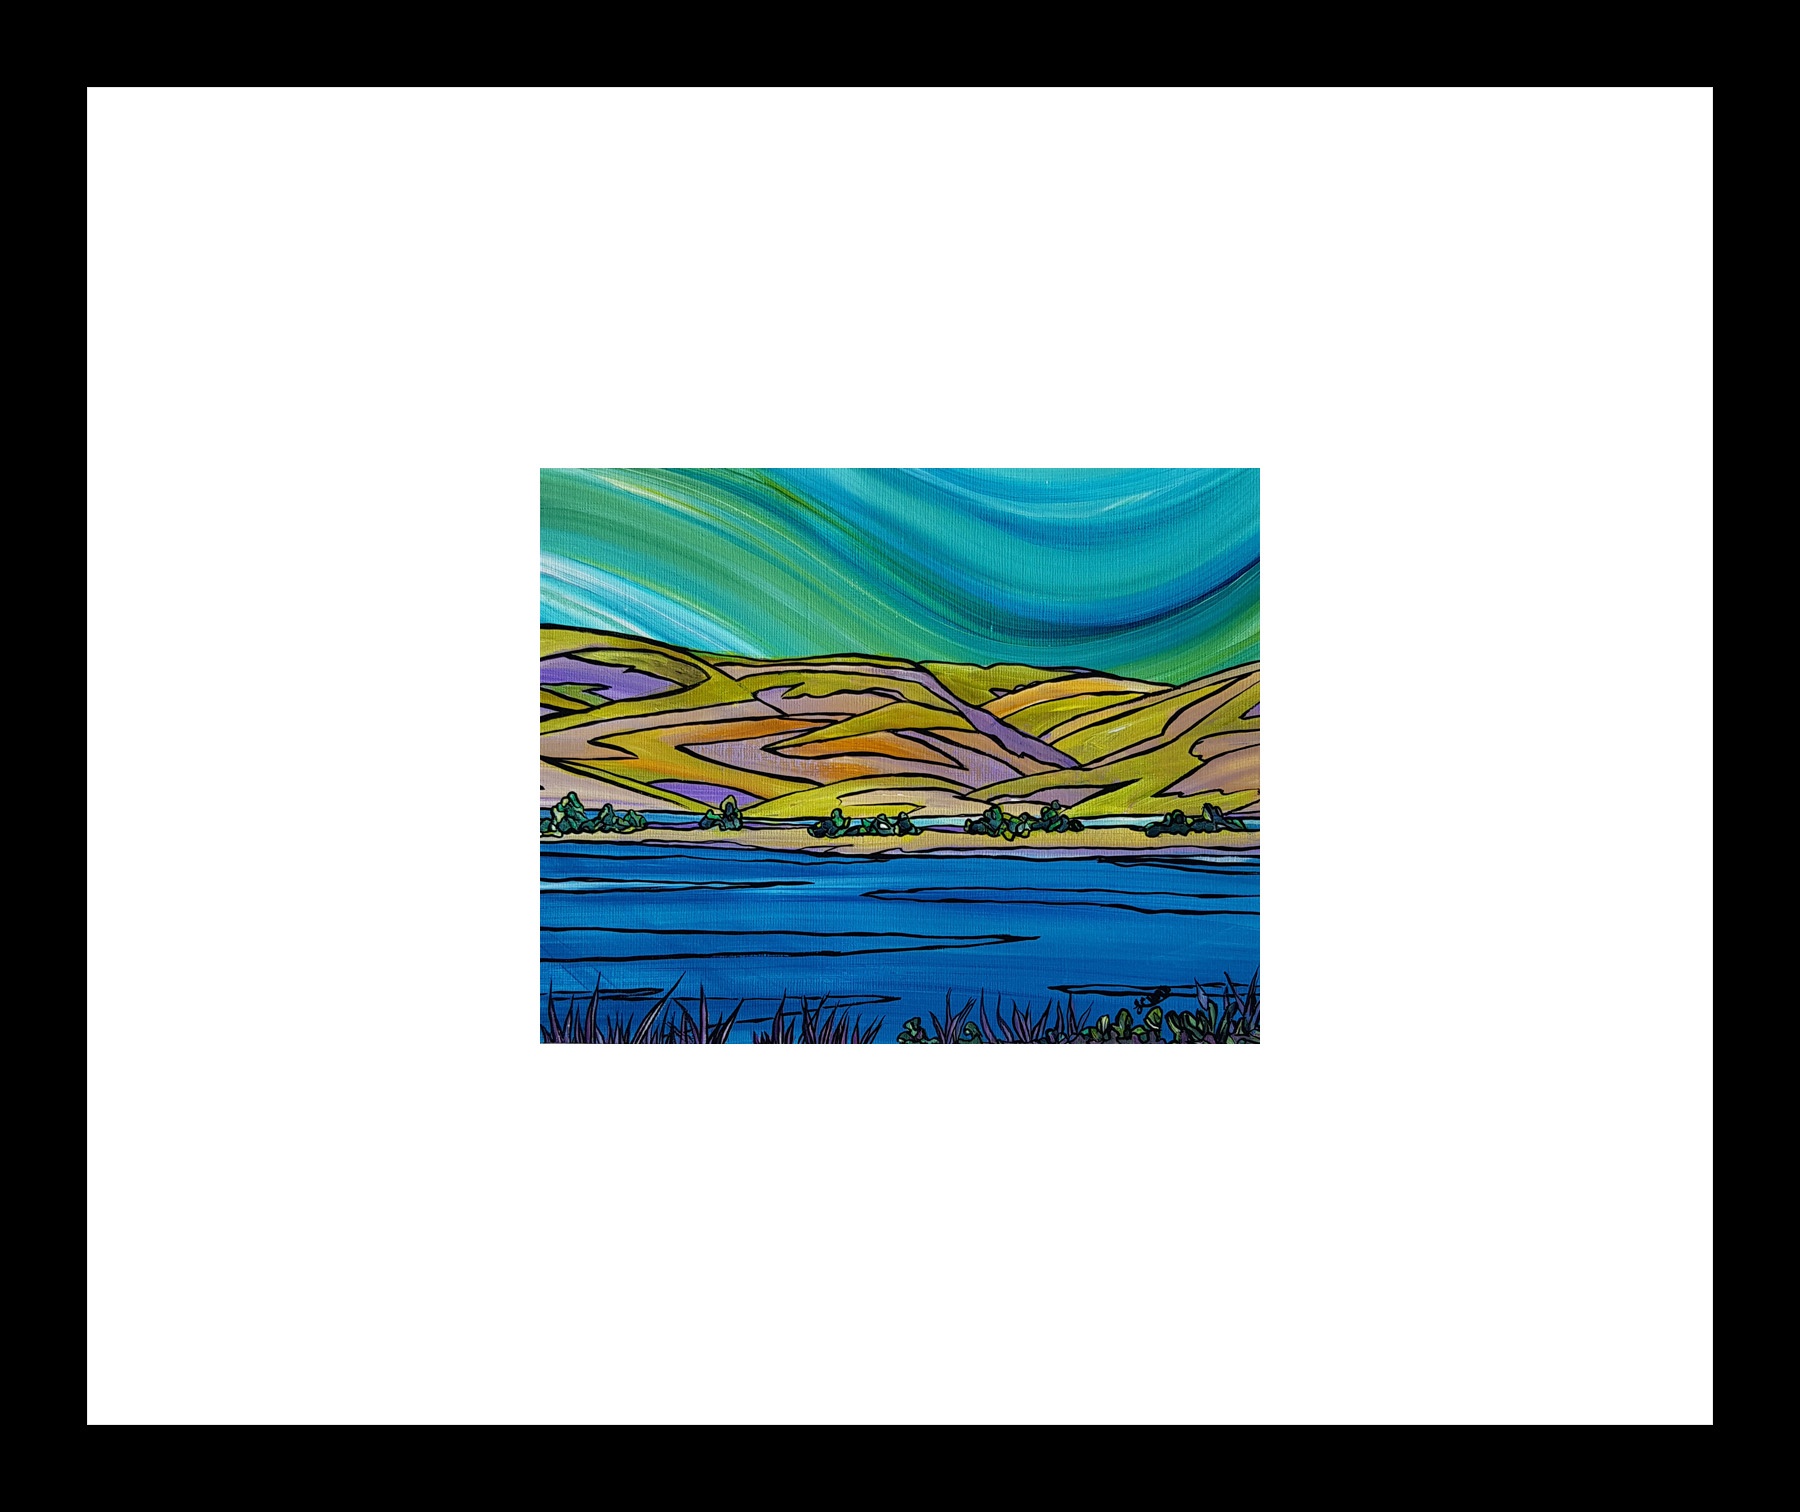 "Along the Qu'Appelle" [2018]
Image: 9.5" x 7.5"
Framed: 20" x 20"
Acrylic on 246 lb. paper
$250.00